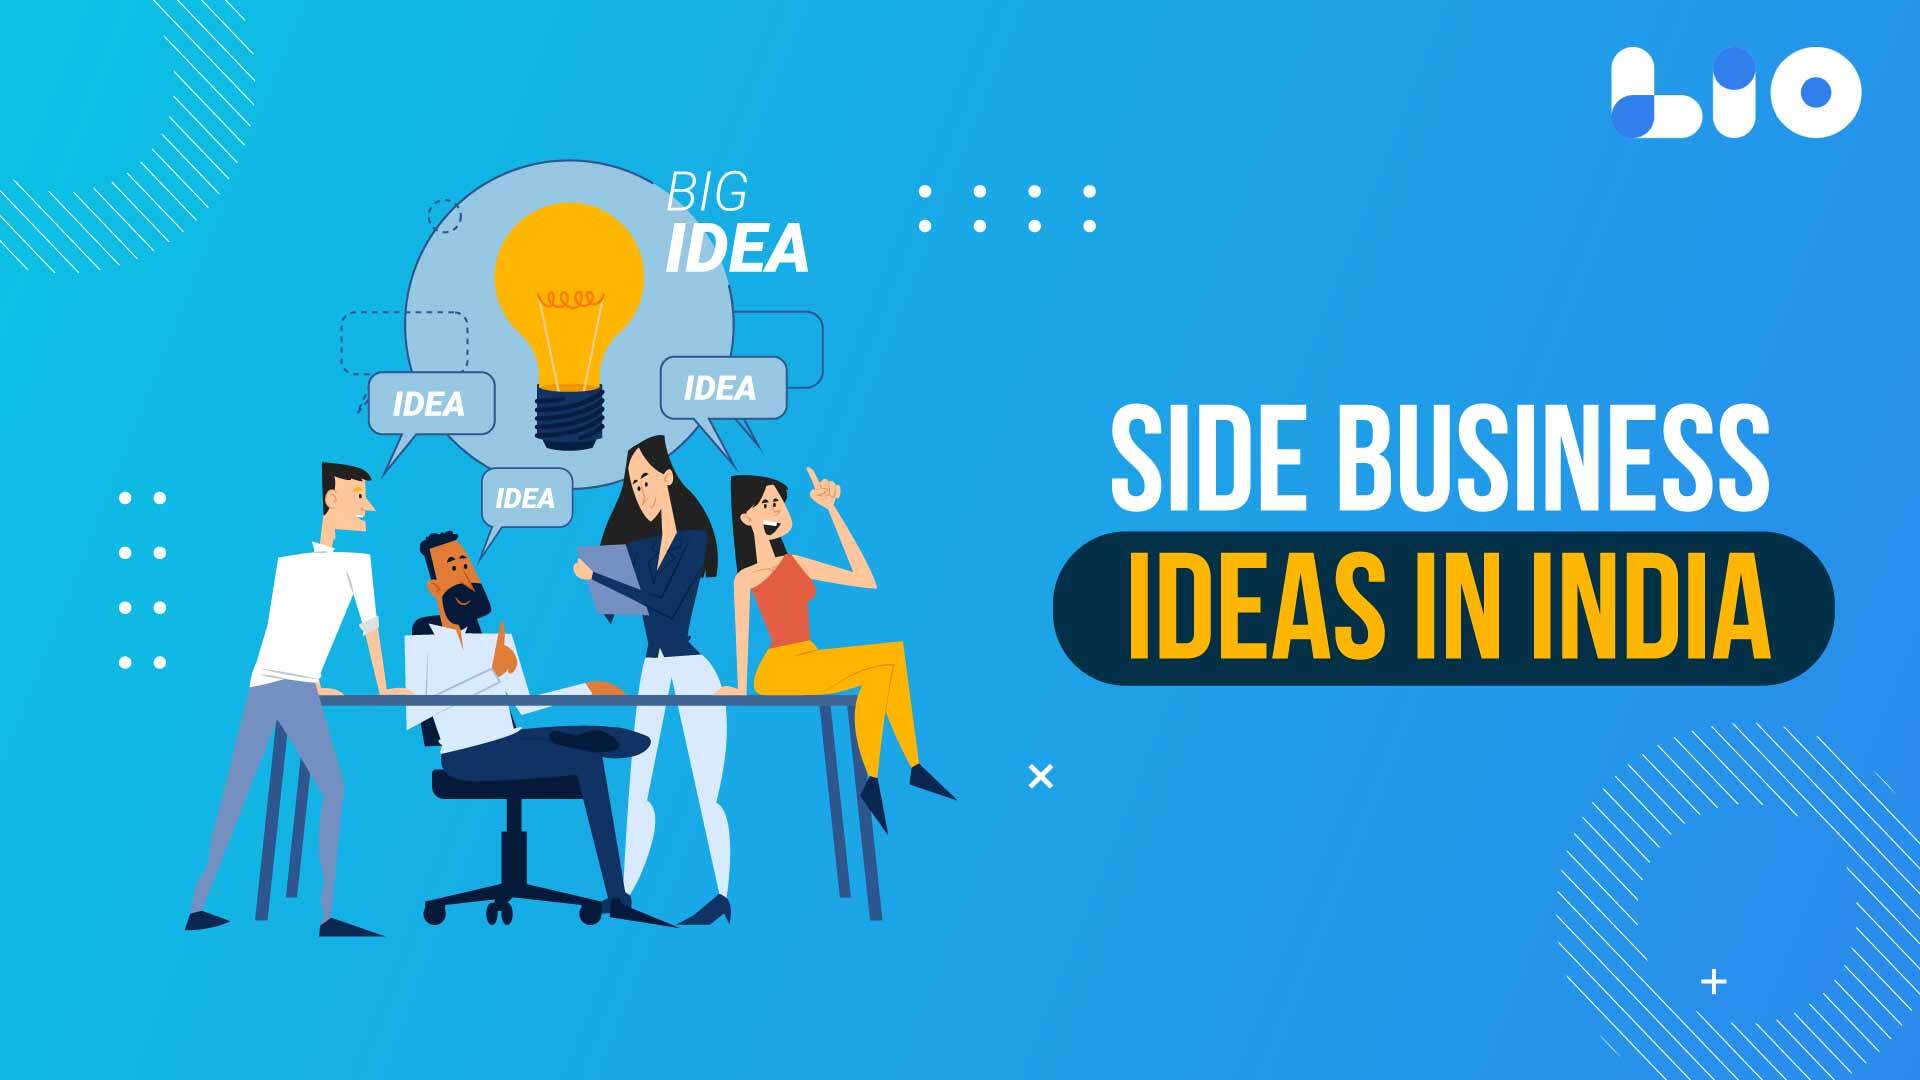 Side Business Ideas in India